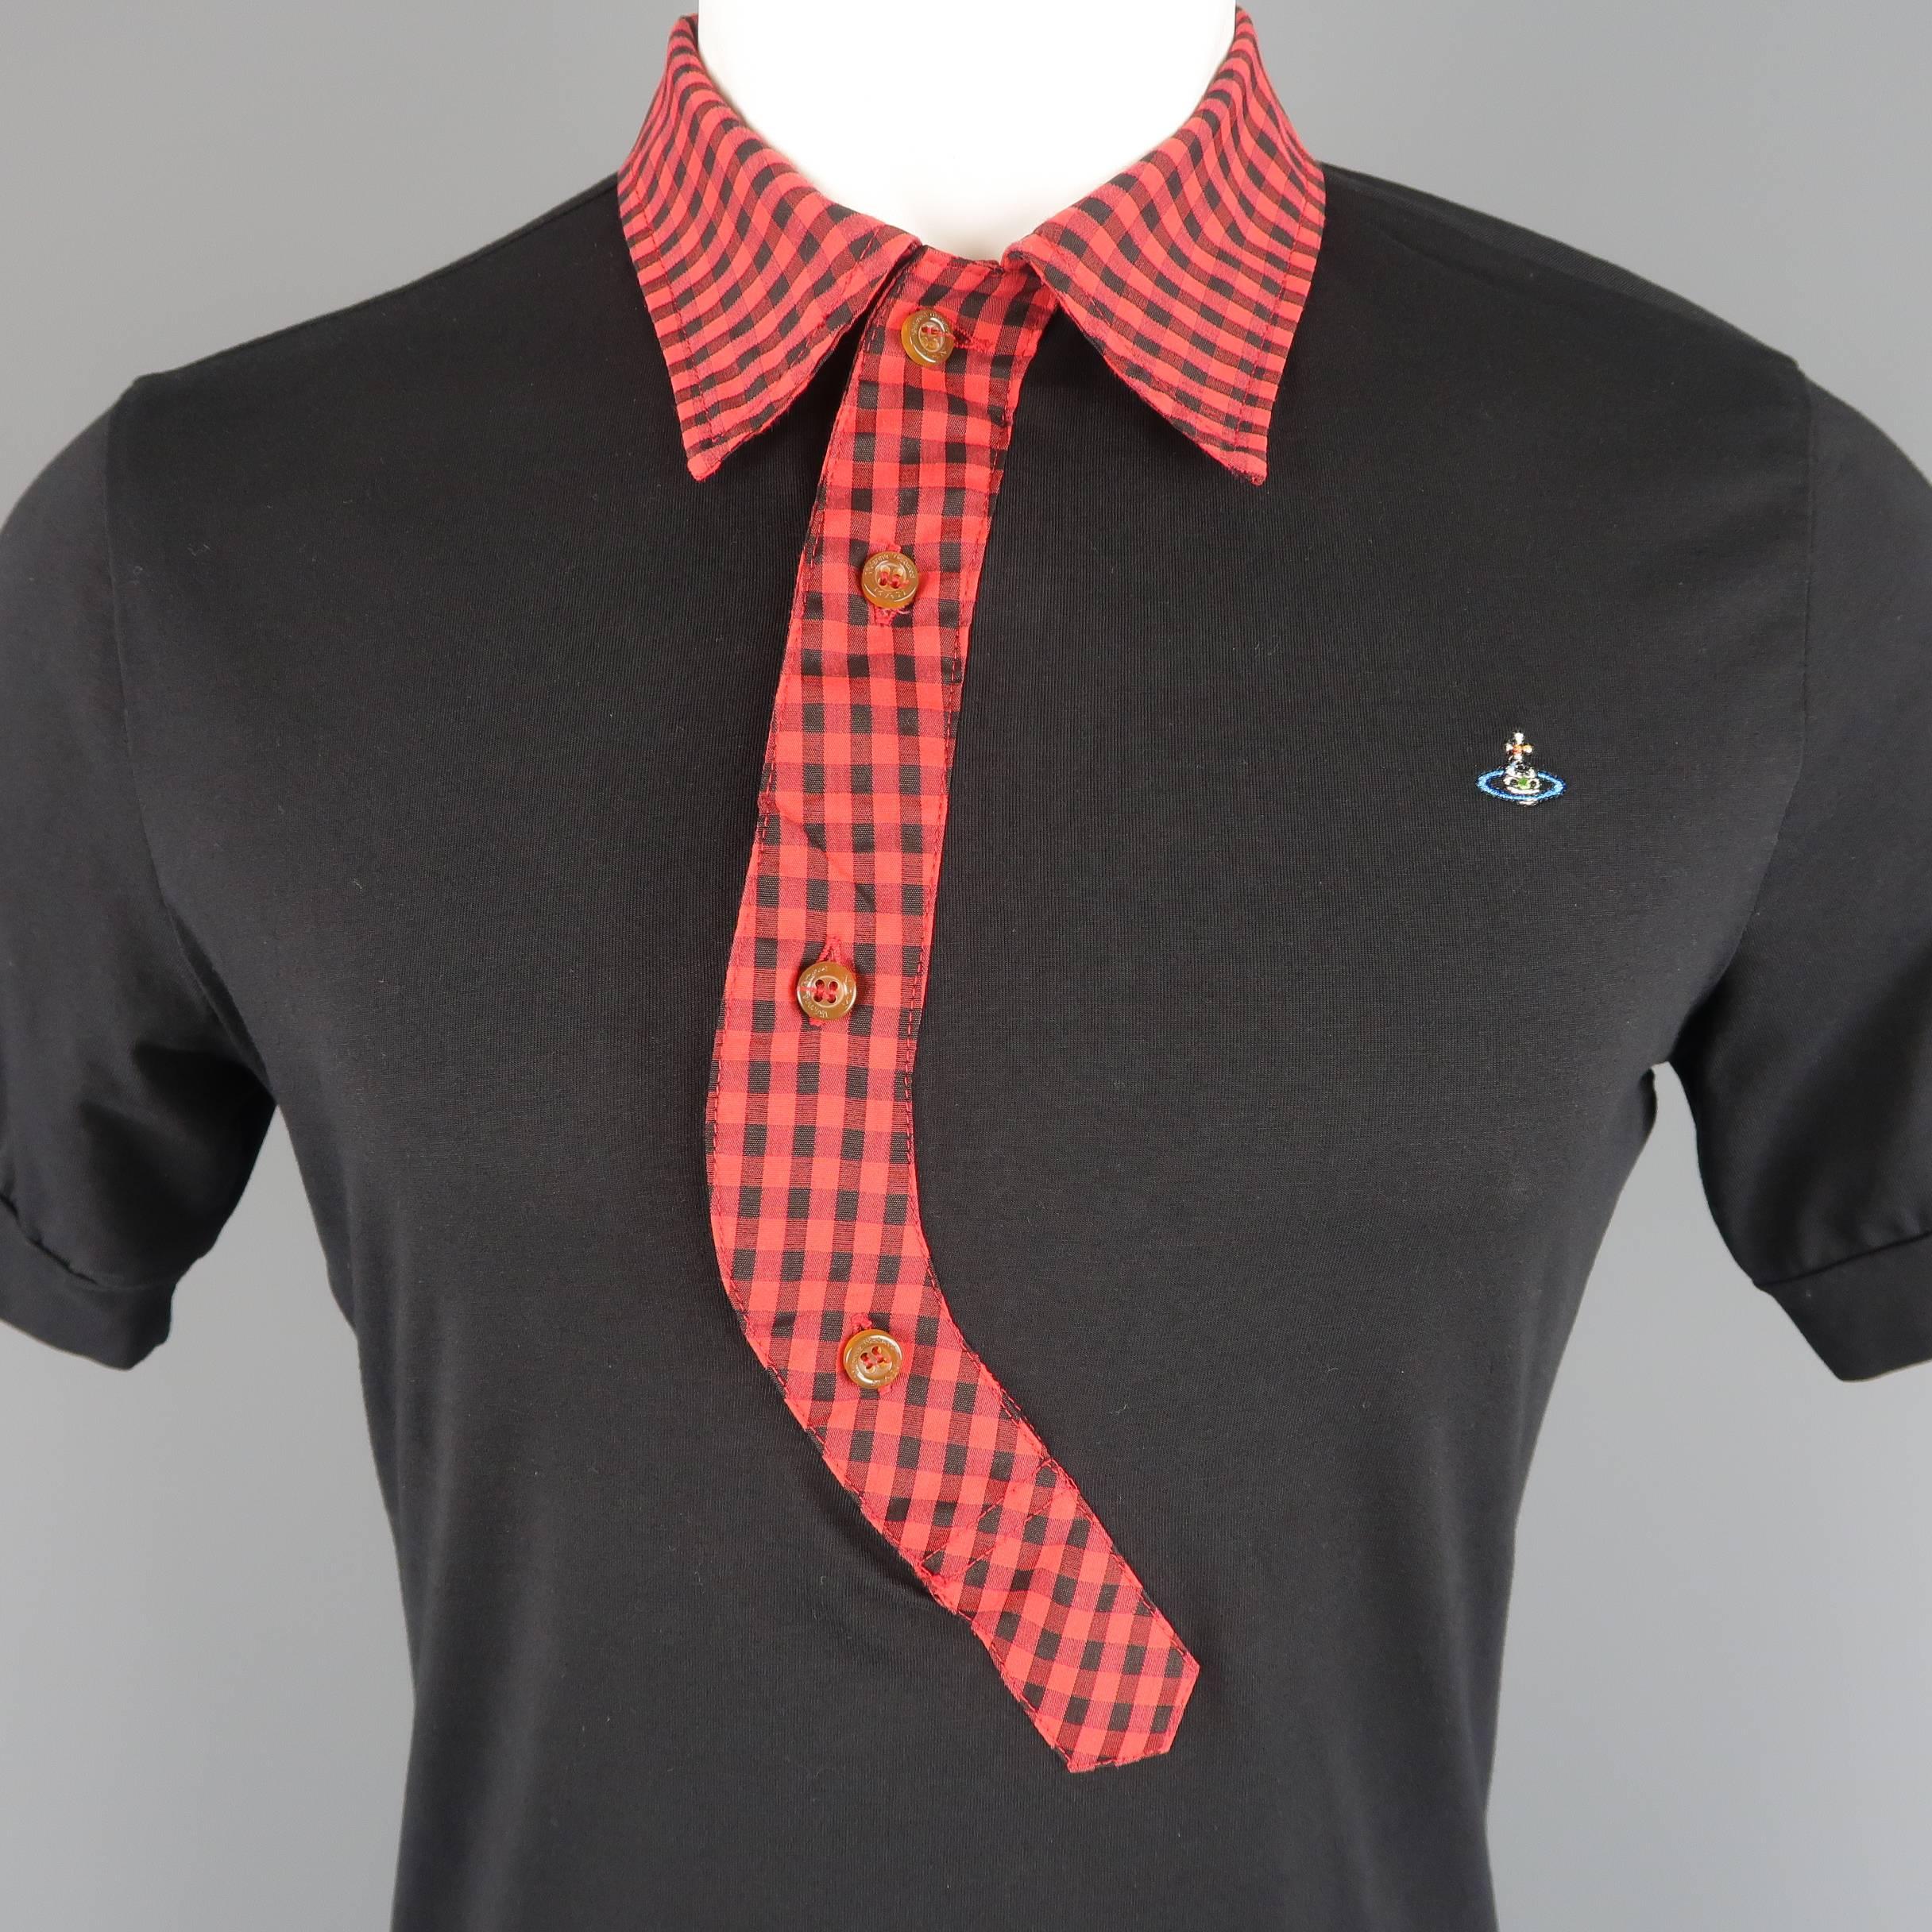 
VIVIENNE WESTWOOD MAN polo comes in black jersey with a red and black gingham plaid collar with asymmetrical buttoned closure and orb emblem.
 
Good Pre-Owned Condition.
Marked: M
 
Measurements:
 

    Shoulder: 17 in.
    Chest: 40 in.
   